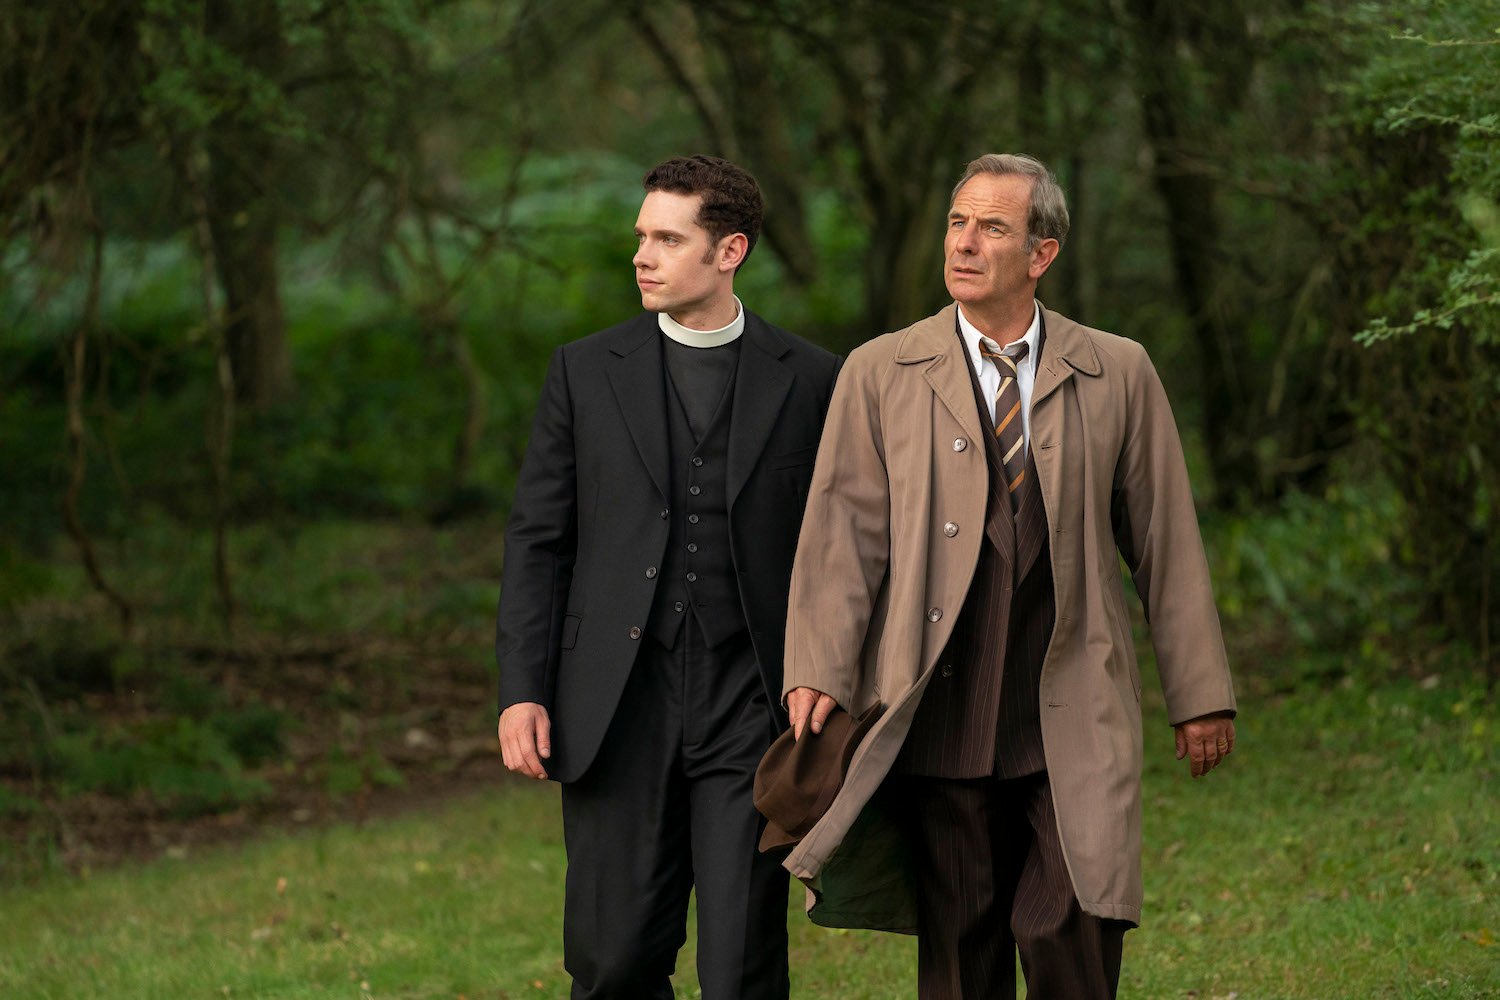 Tom Brittney as Will Davenport, wearing priest's collar, and Robson Green as Geordie Keating, wearing tan jacket, in 'Grantchester' 